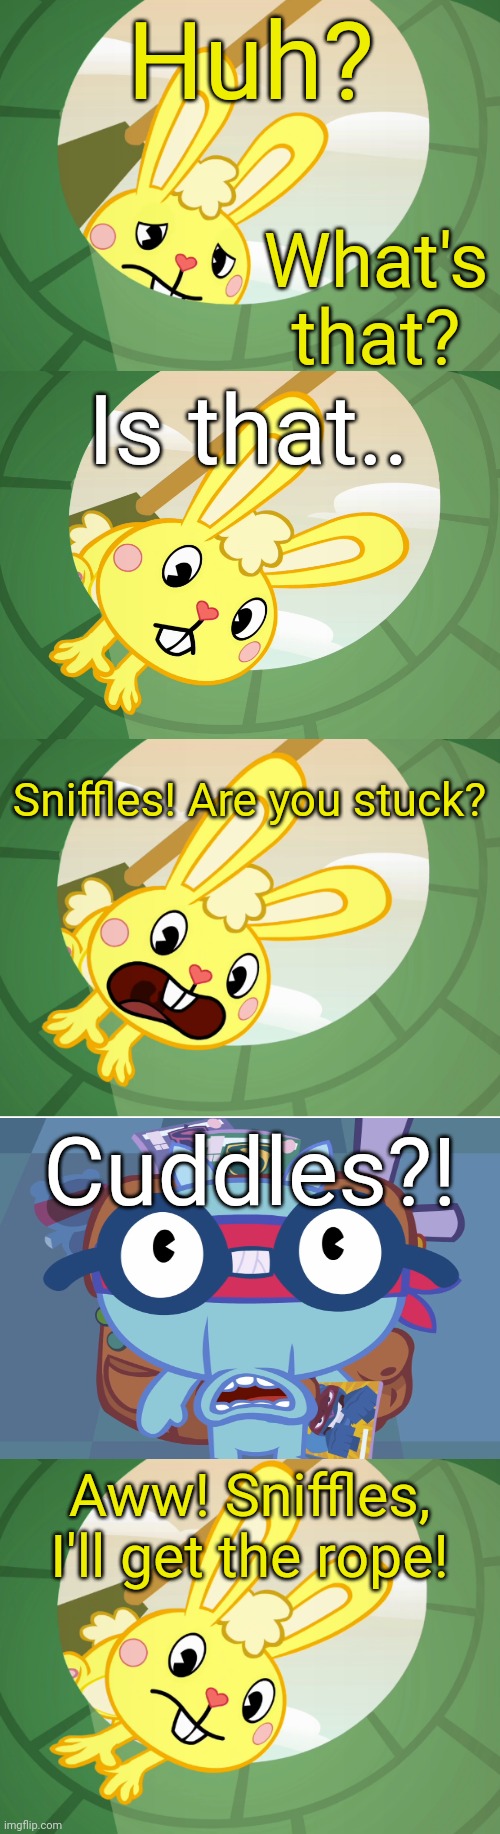 Cuddles Saw Underground (HTF) | Huh? What's that? Is that.. Sniffles! Are you stuck? Cuddles?! Aww! Sniffles, I'll get the rope! | image tagged in cuddles saw underground htf,surprised sniffles htf,happy tree friends | made w/ Imgflip meme maker